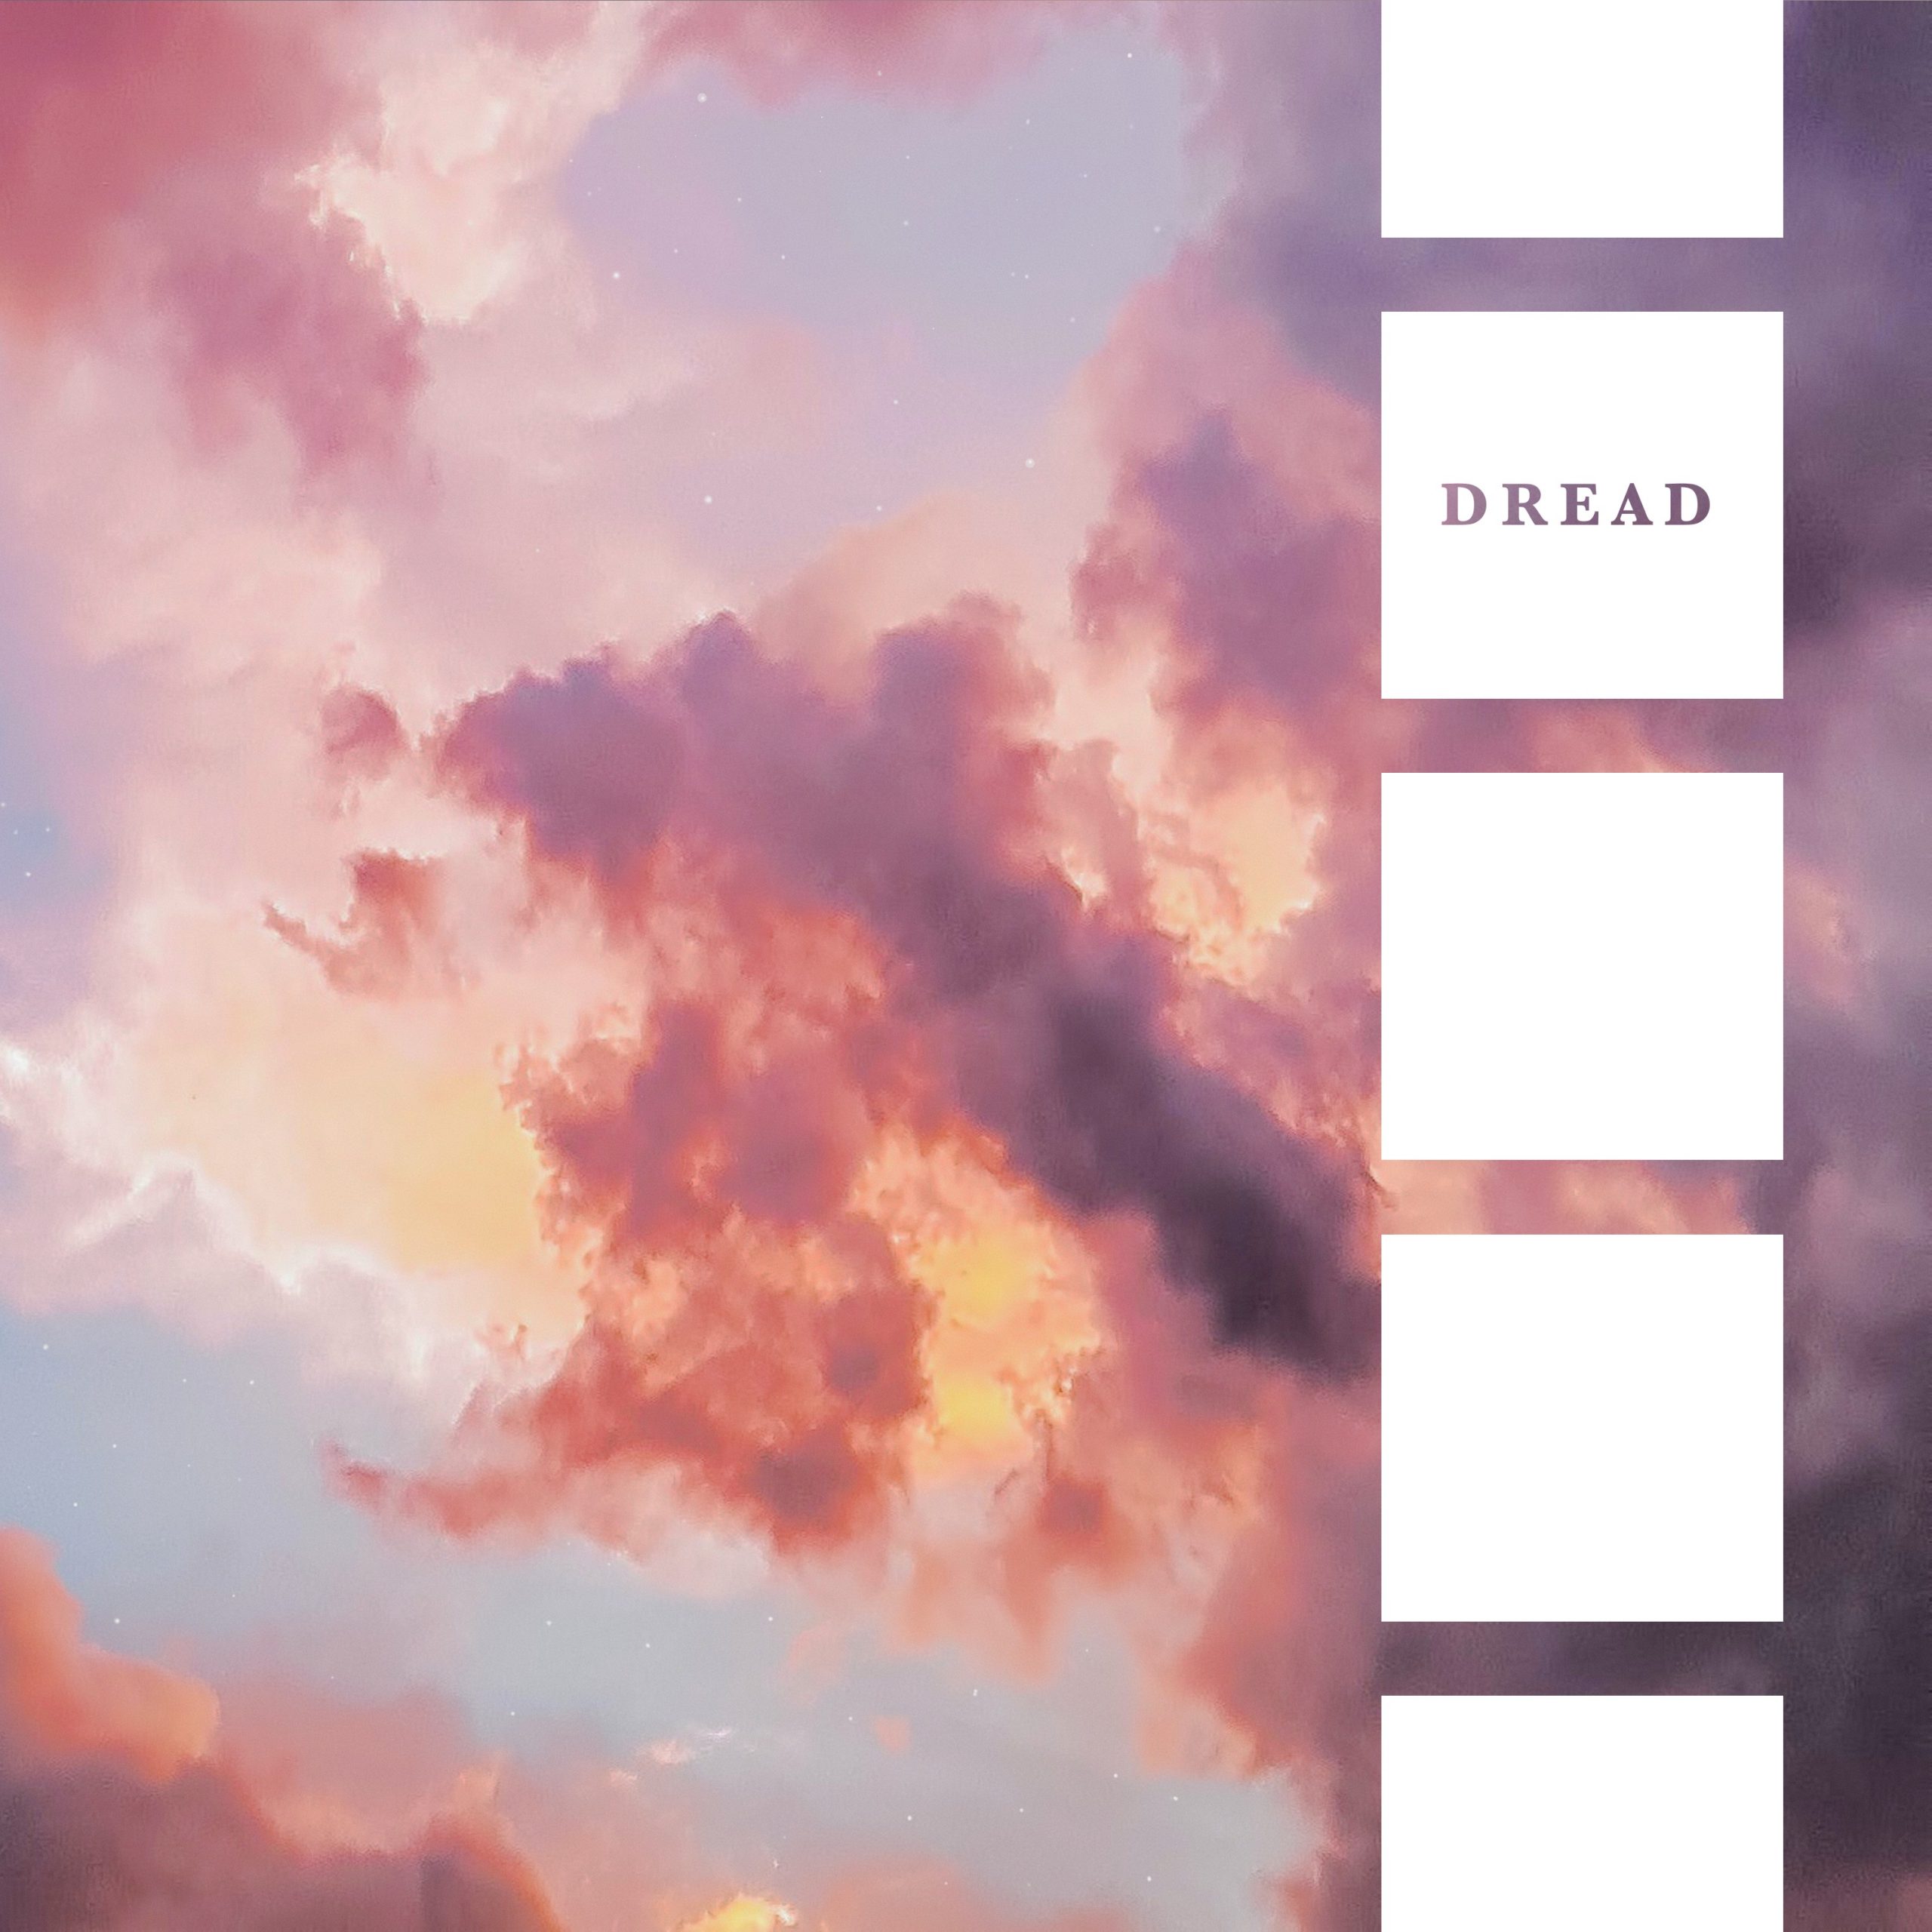 Mulini Gears Up for EP Release with New Single, “Dread”